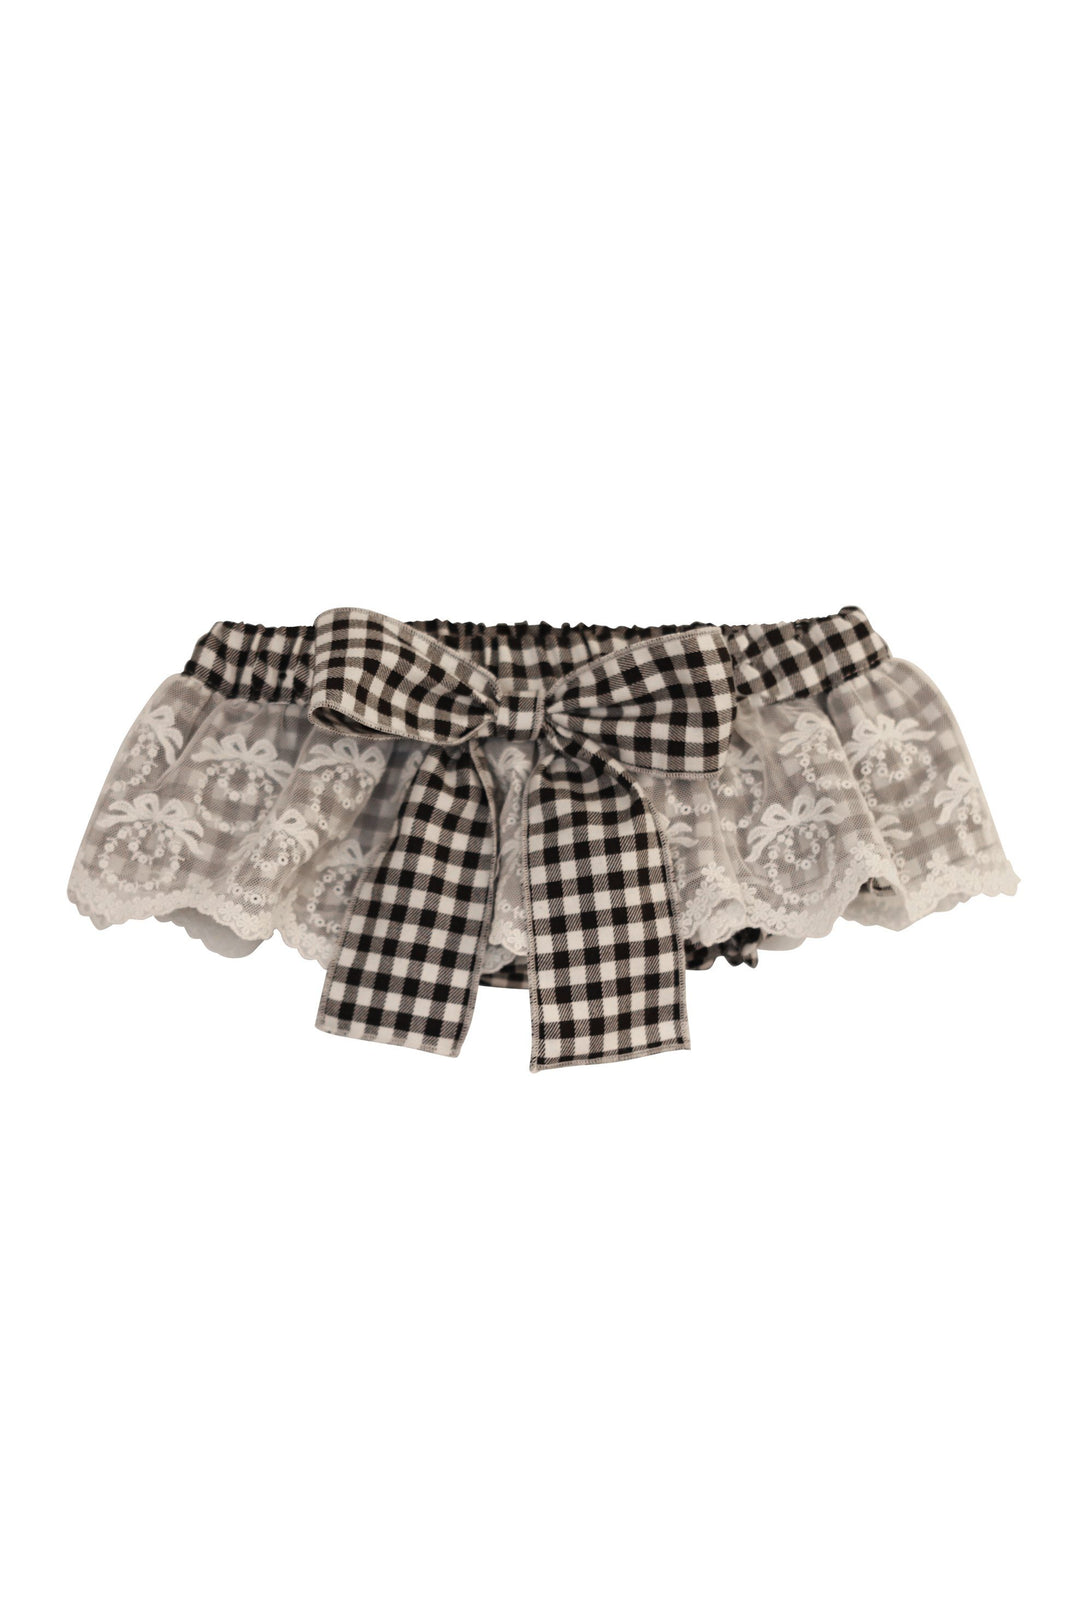 Phi "Camille" Black Gingham Lace Bloomers | Millie and John